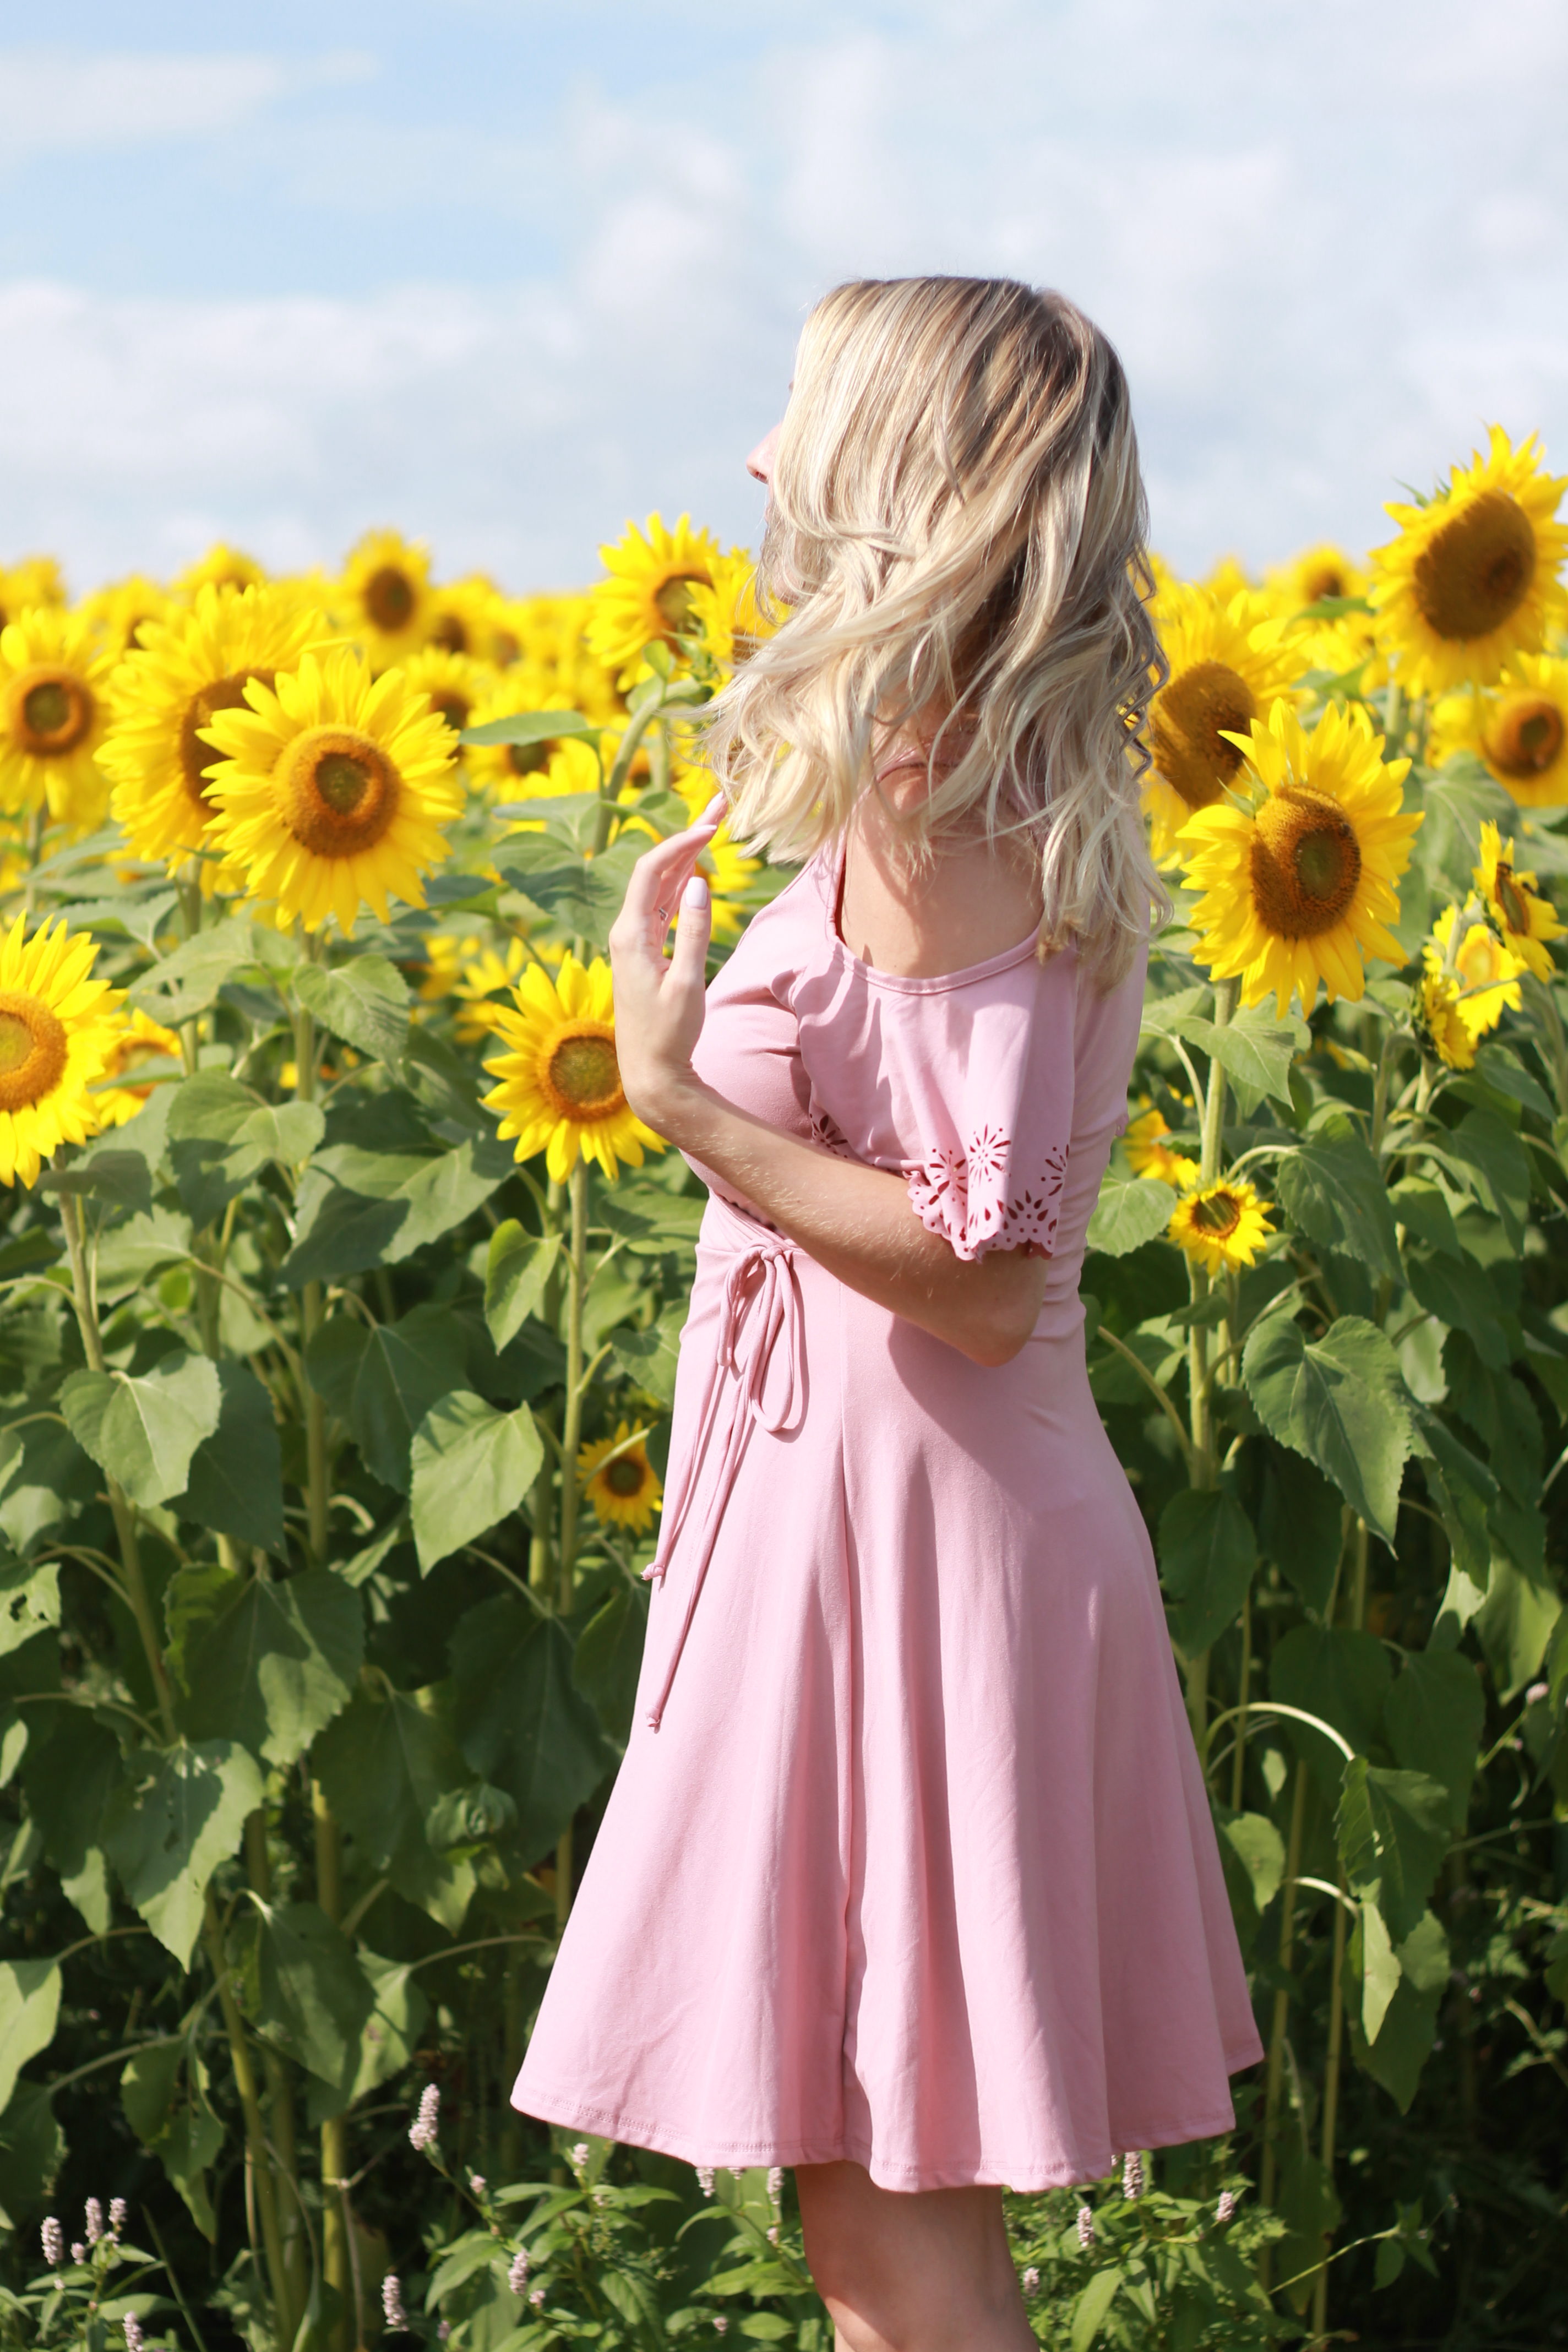 Sunflower fields at Colby Farm | Dress from Francesca's | ourlittlehomestyle.com